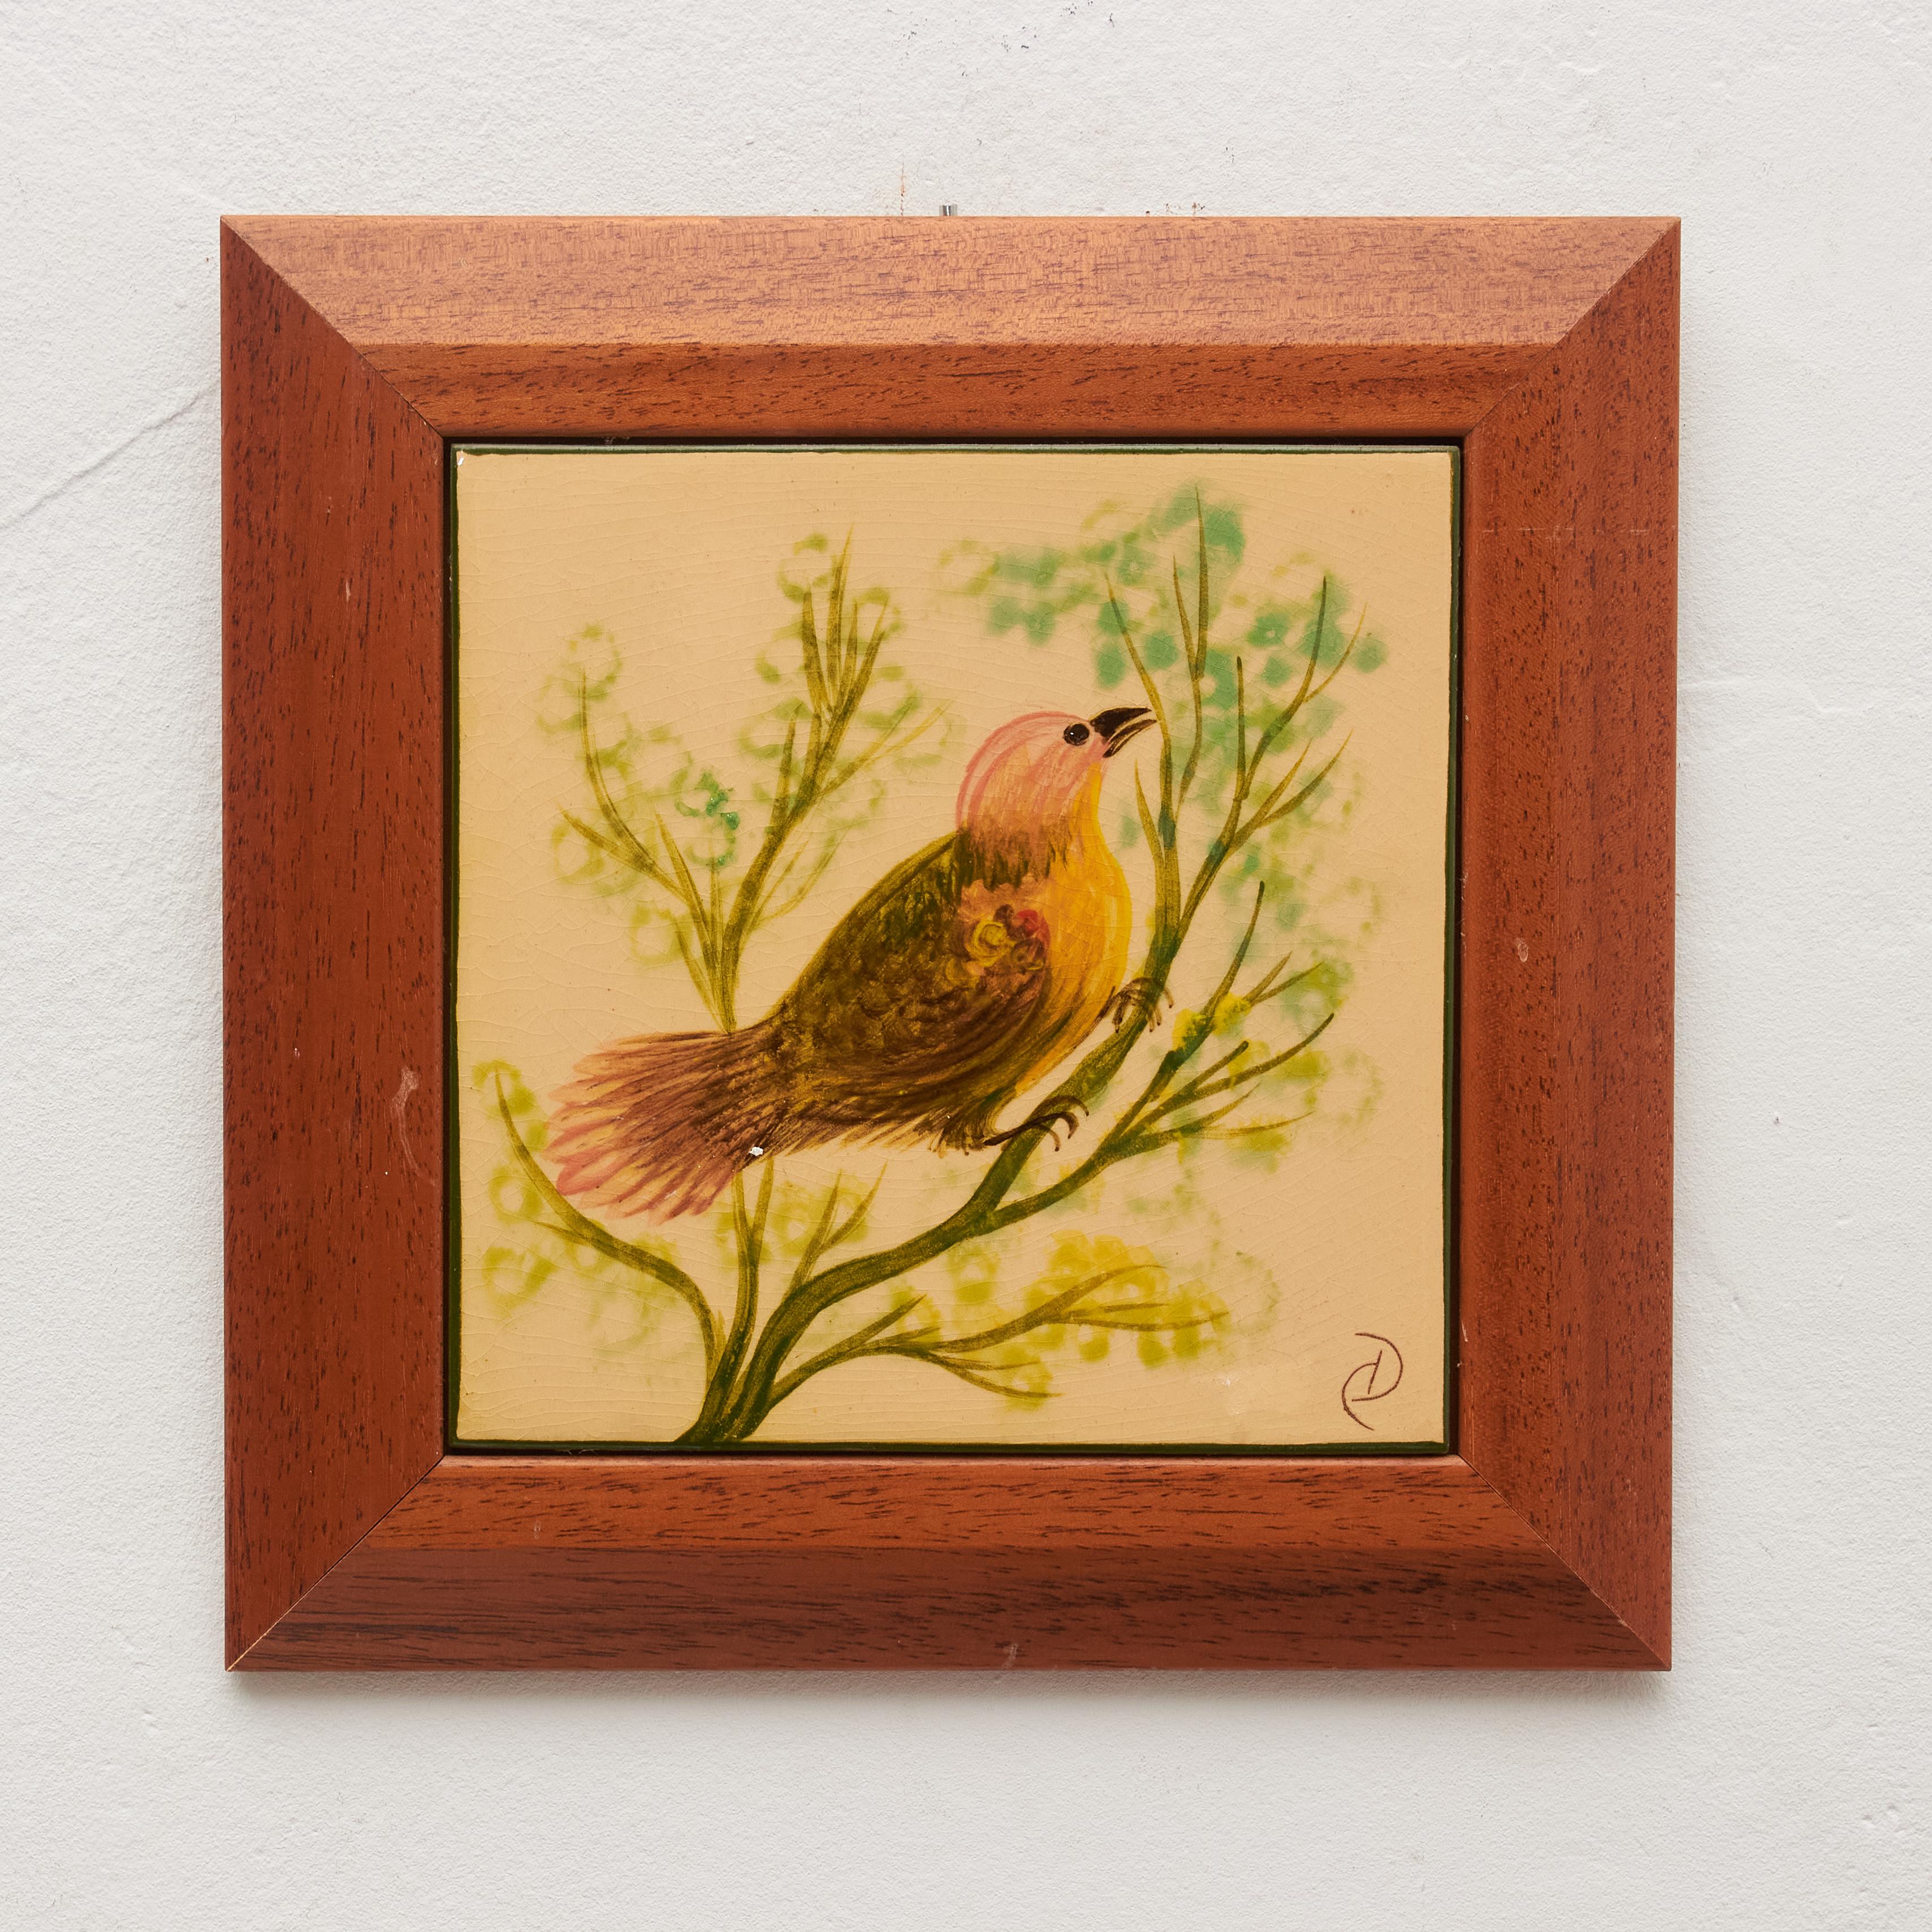 Immerse yourself in the artistic mastery of Catalan artist Diaz Costa with our vintage ceramic hand-painted artwork of a bird, circa 1960. This exquisite piece, framed and signed by the artist, captures the essence of a bygone era with its timeless